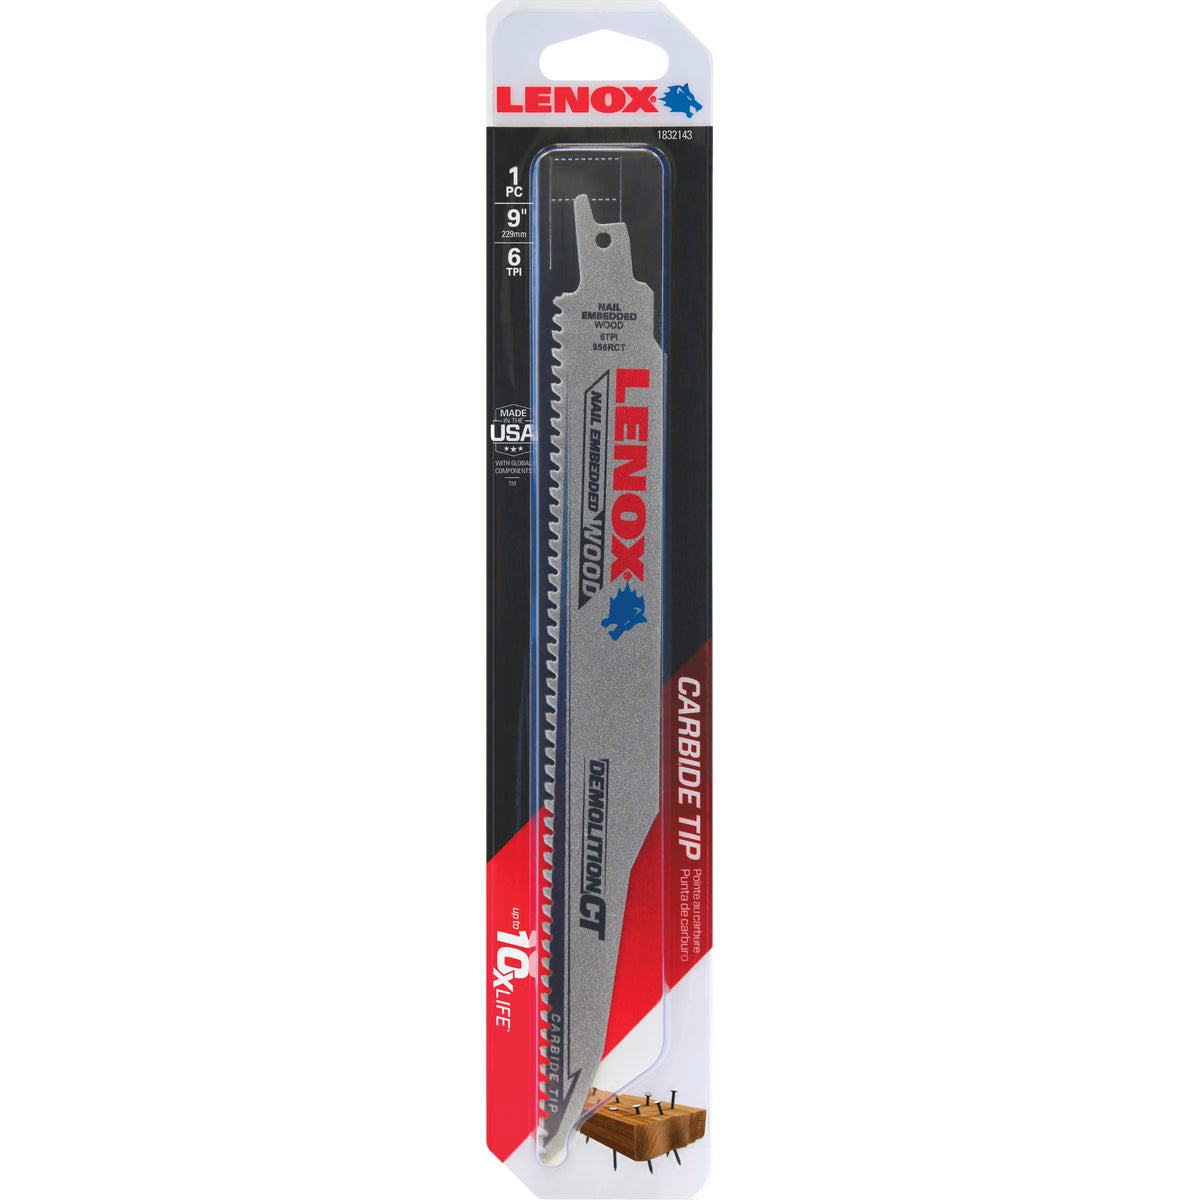 Item 304882, Demolition CT carbide-tipped reciprocating saw blades have up to ten times 